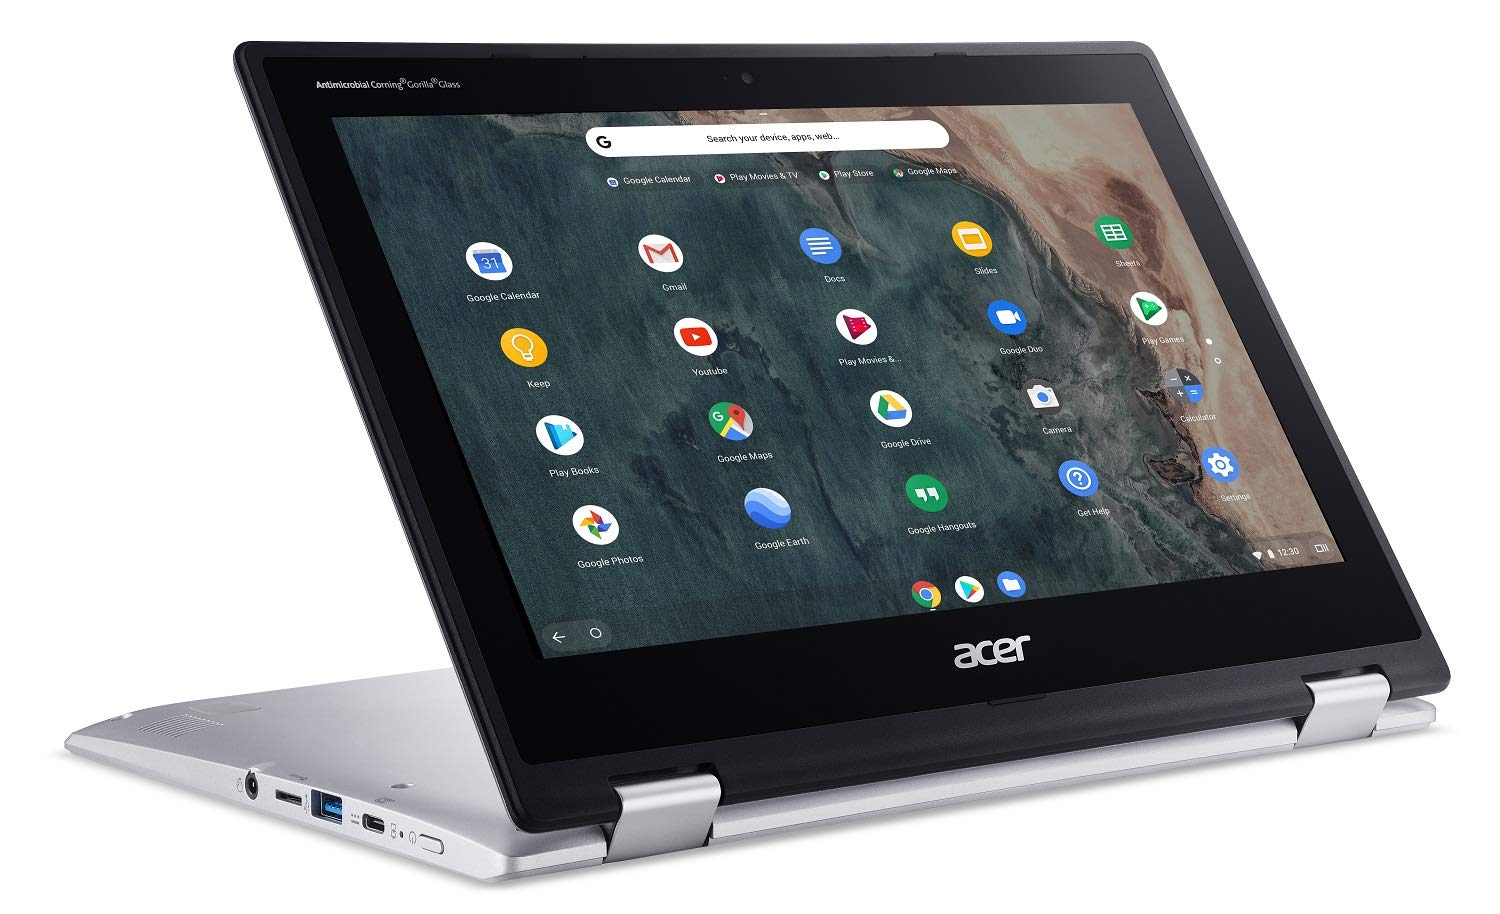 Acer Chromebook Spin 311 is a versatile Chromebook with a good battery life, robust build and solid usability.